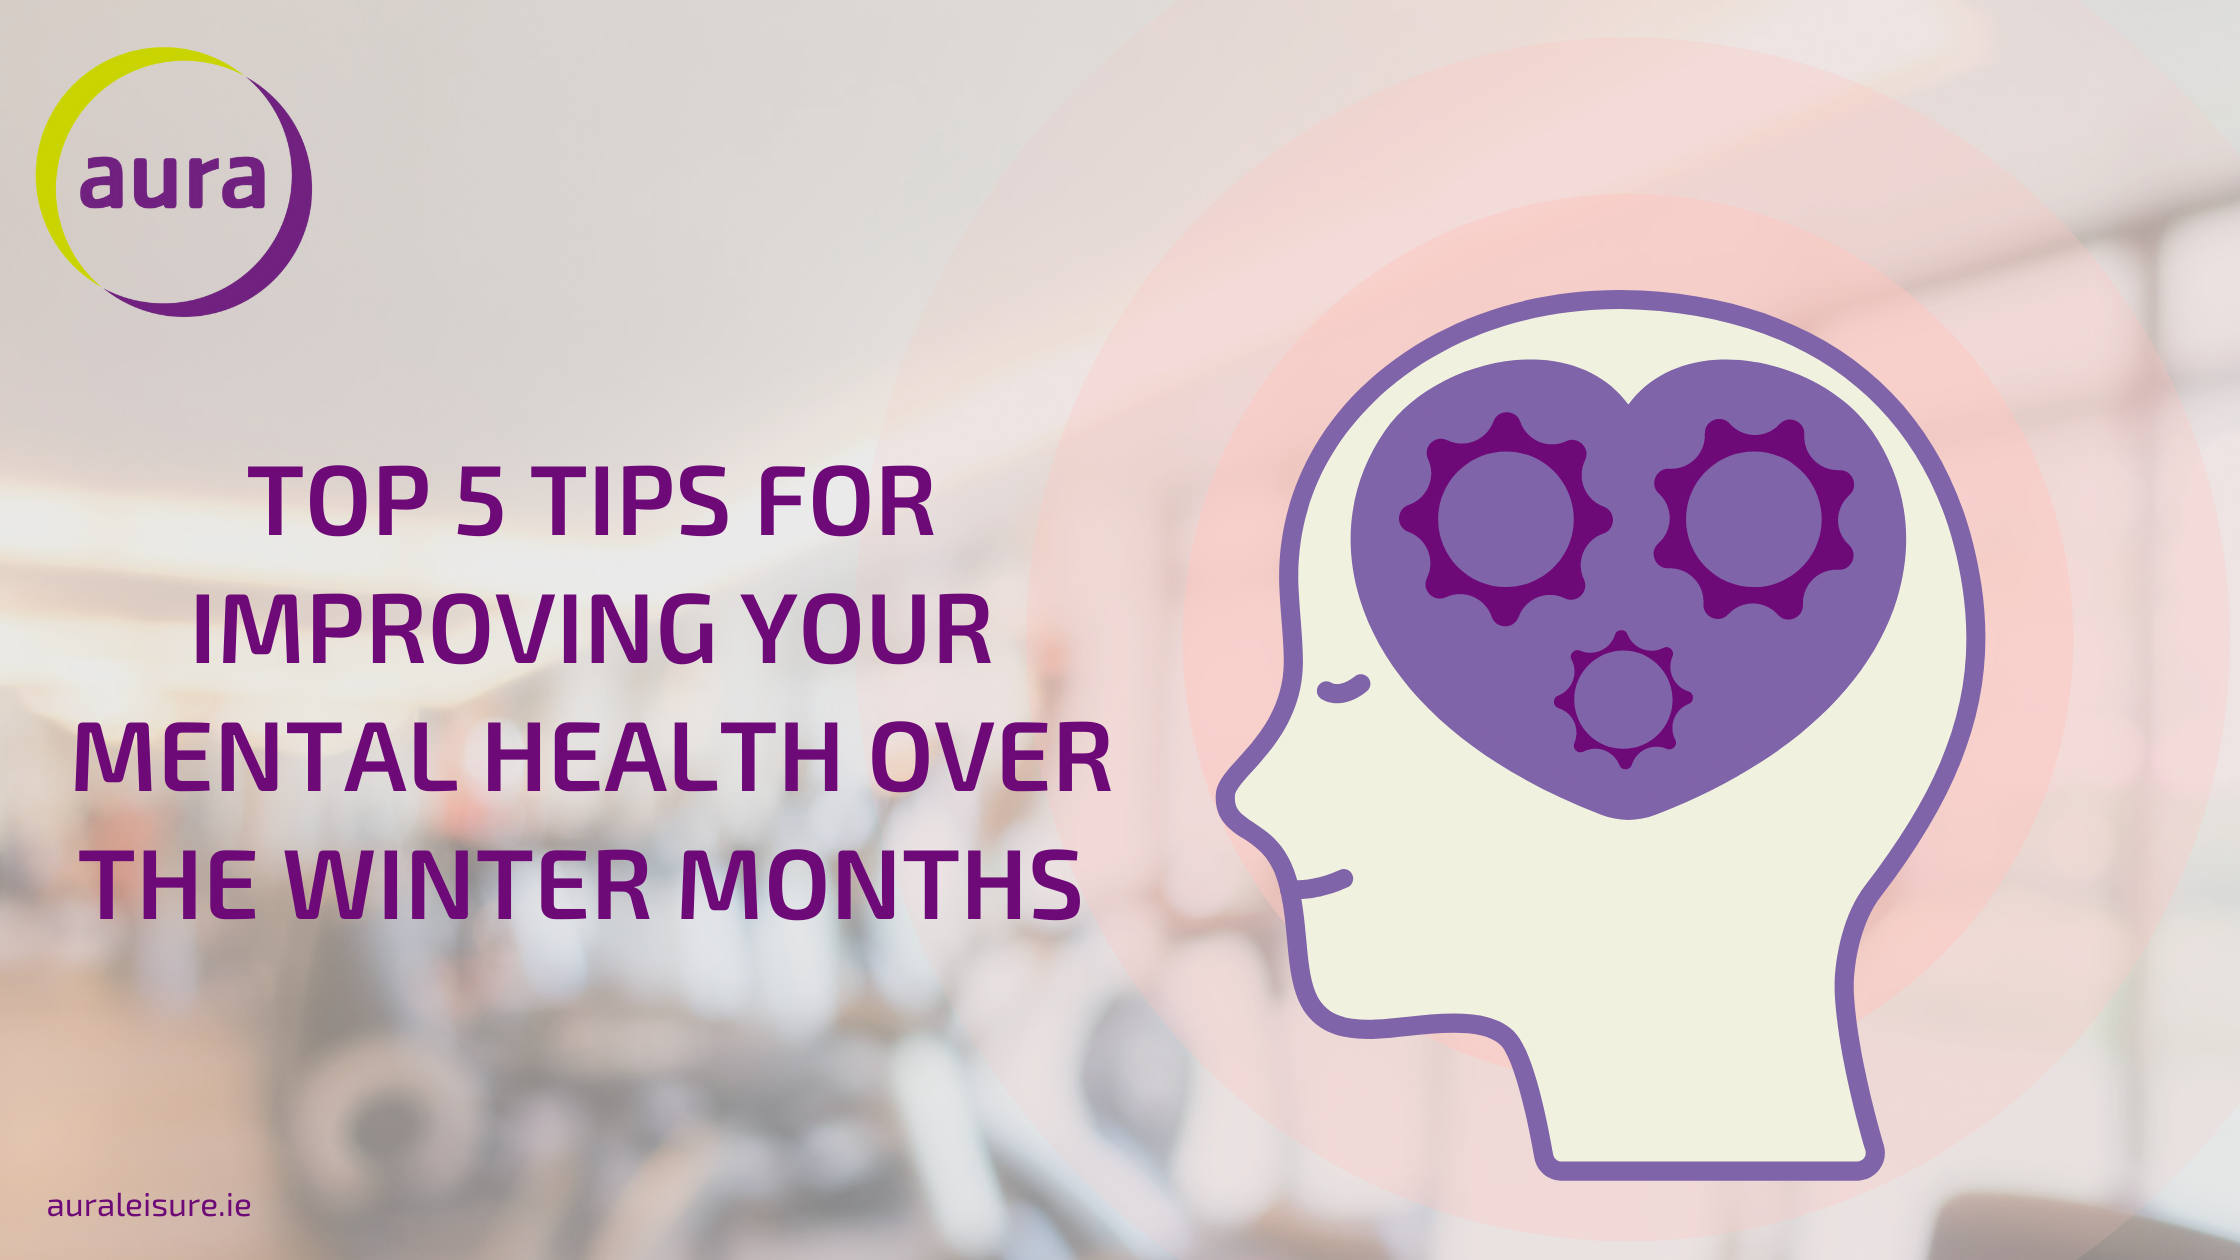 Top 5 Tips For Improving Your Mental Health Over The Winter Months